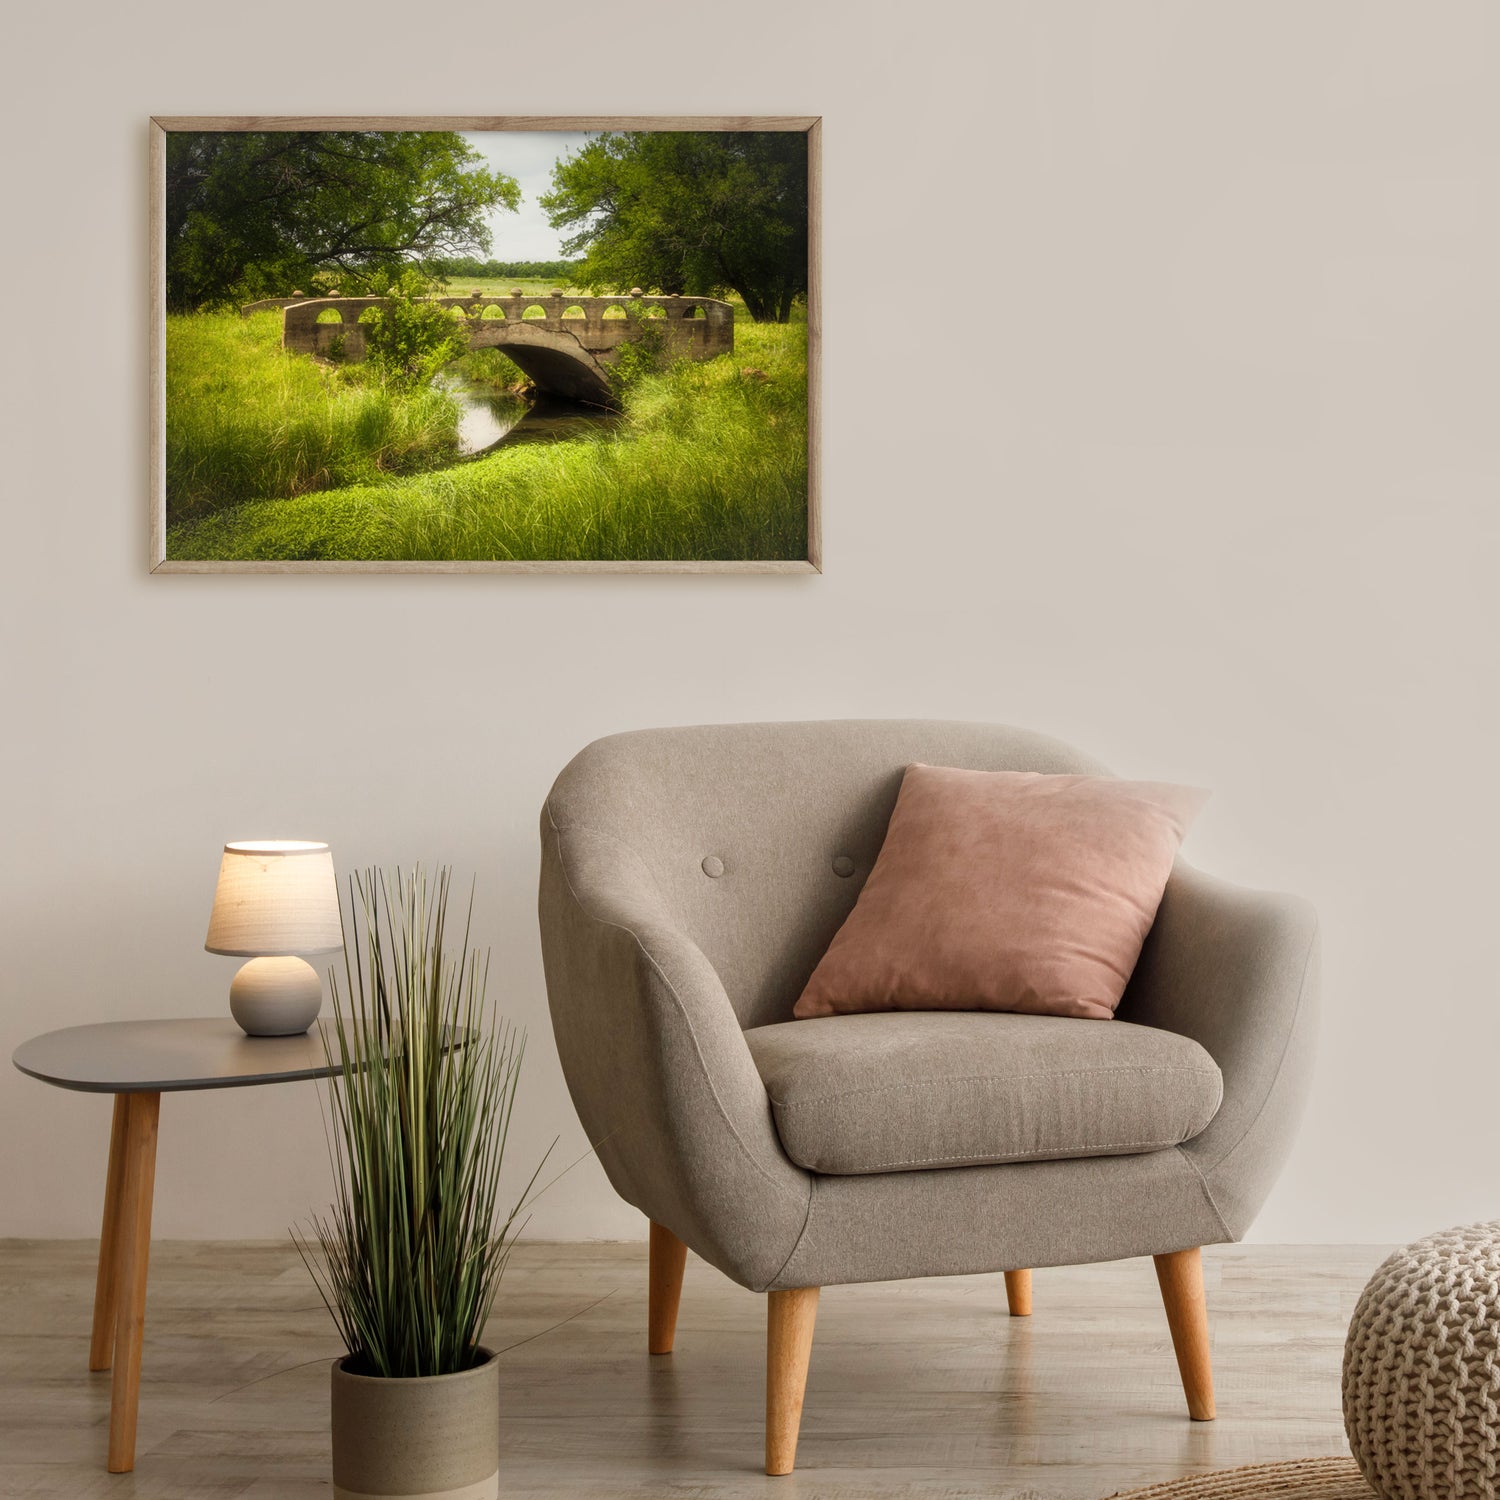 Wall art capturing the rustic charm of a countryside bridge, set against the backdrop of flourishing plants and soft natural light.